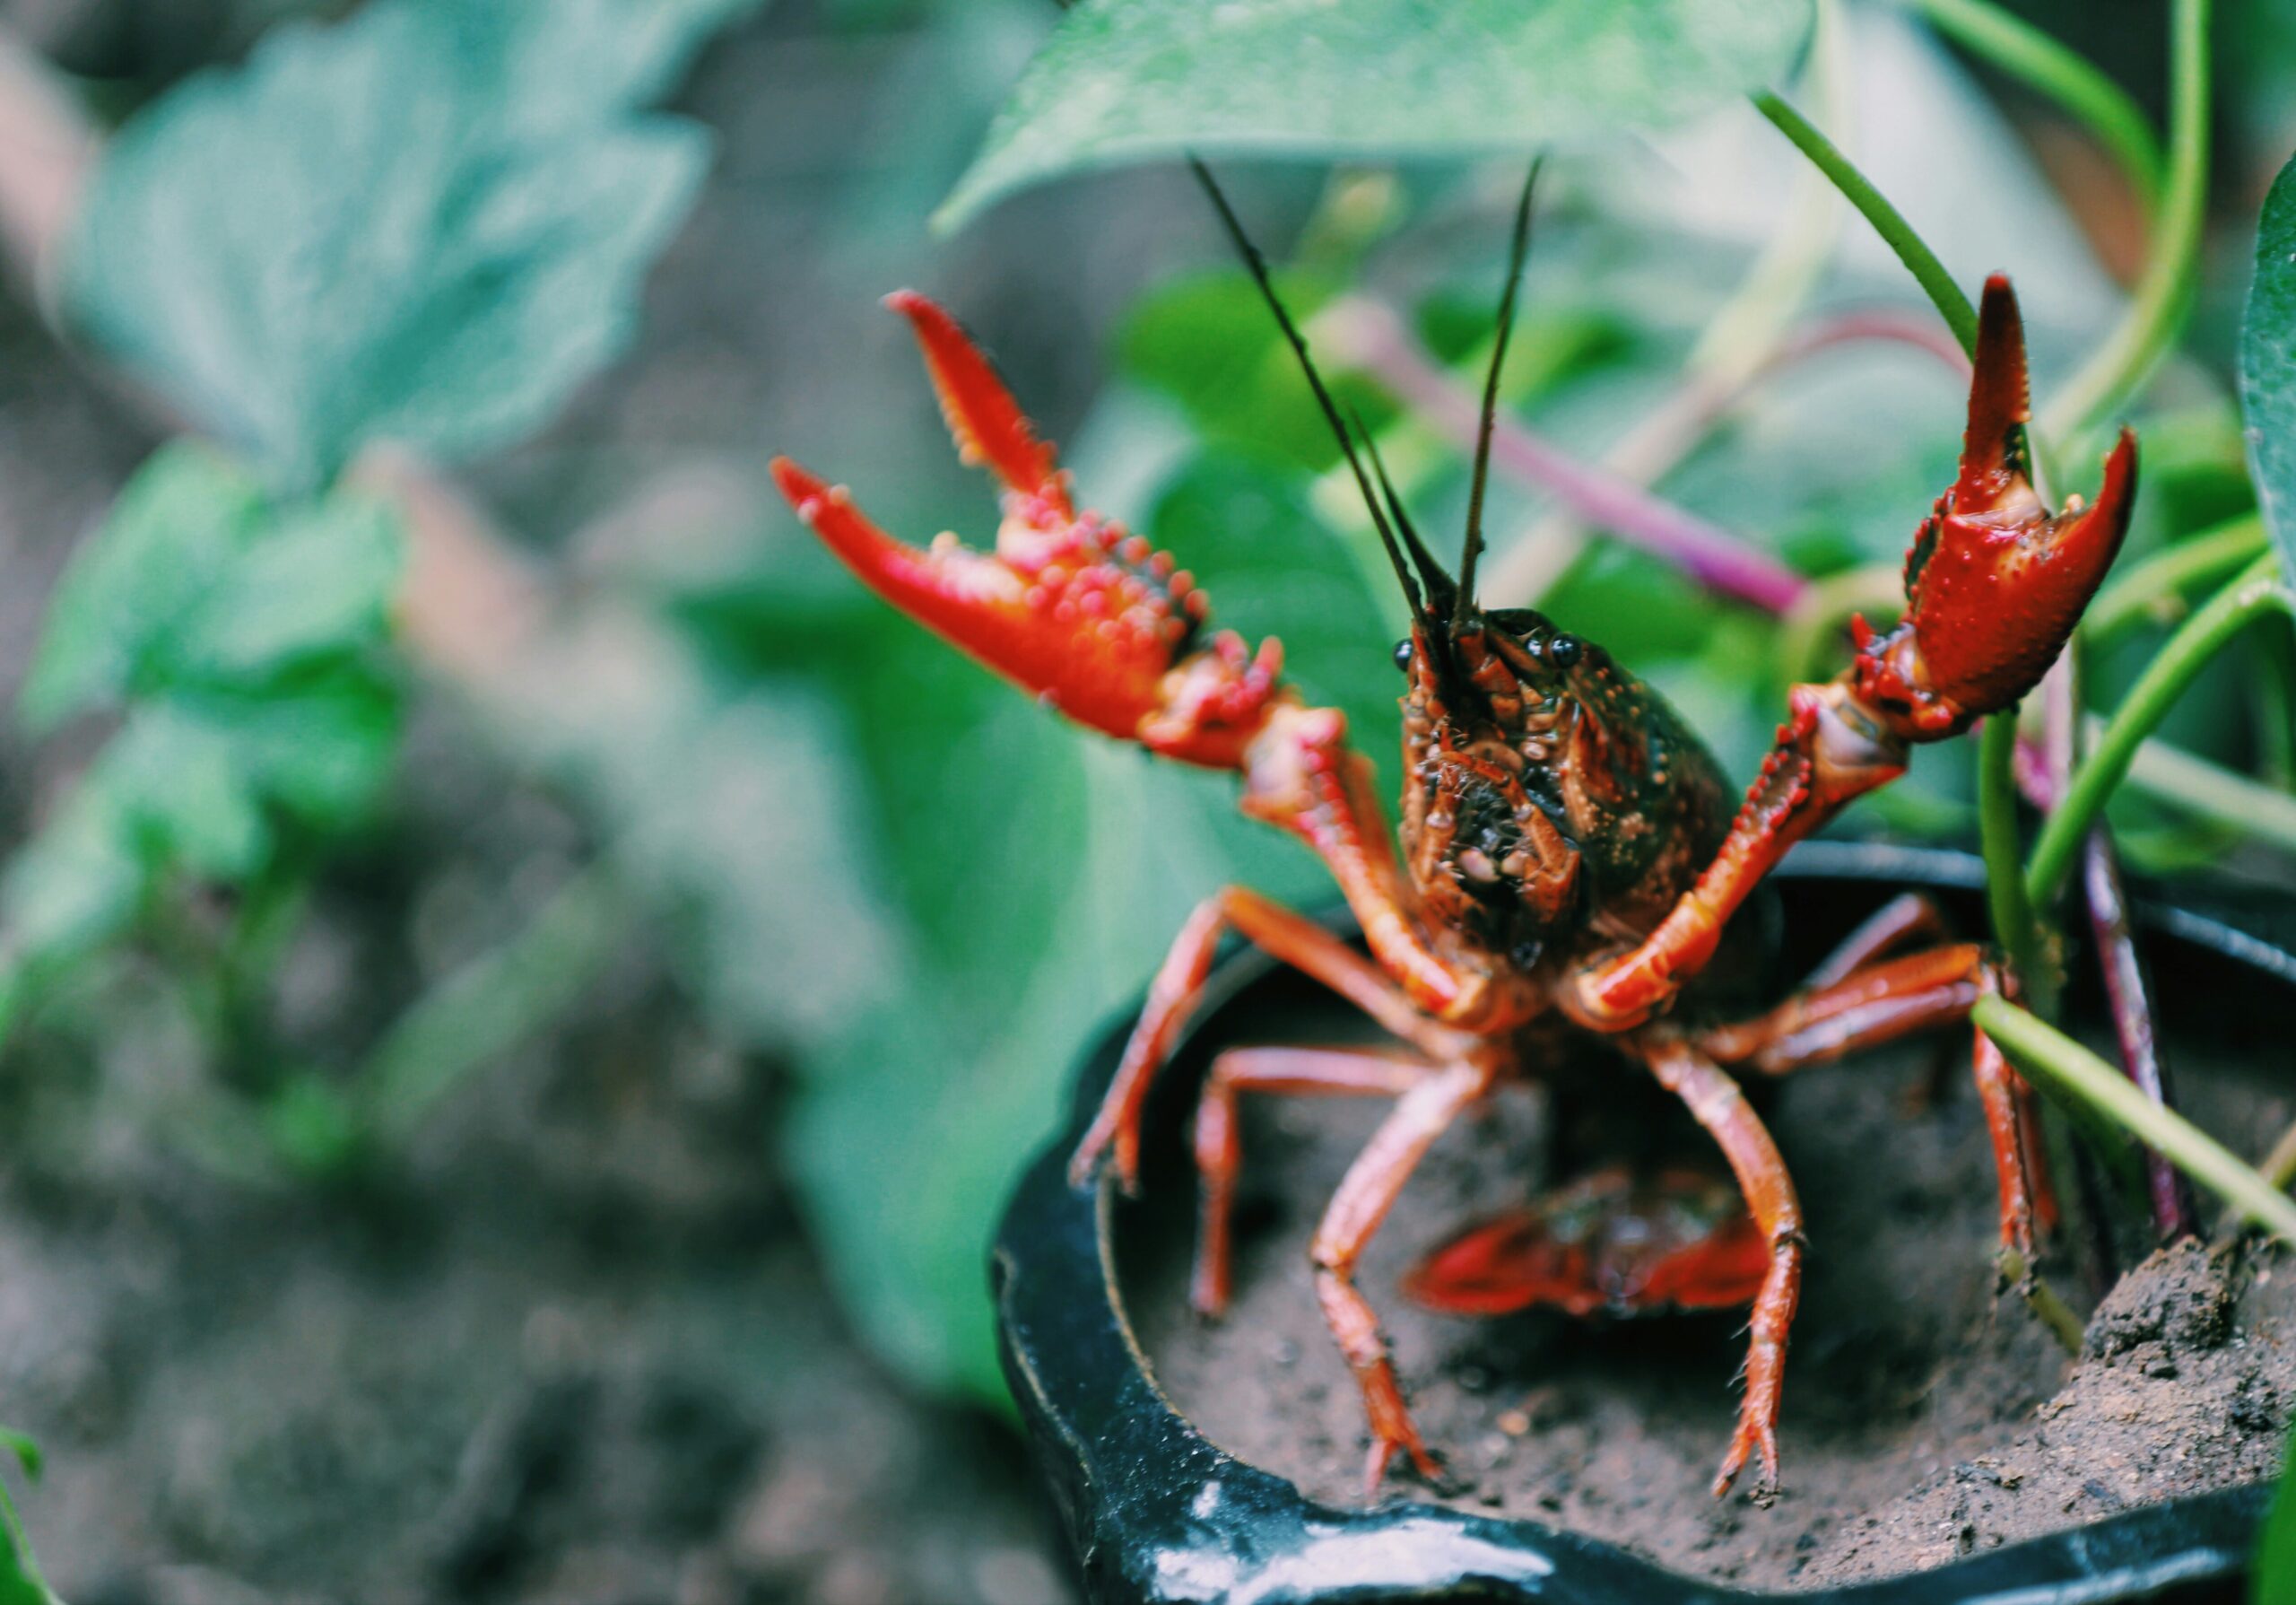 Are Crayfish A Popular Ingredient In Southern Dishes?